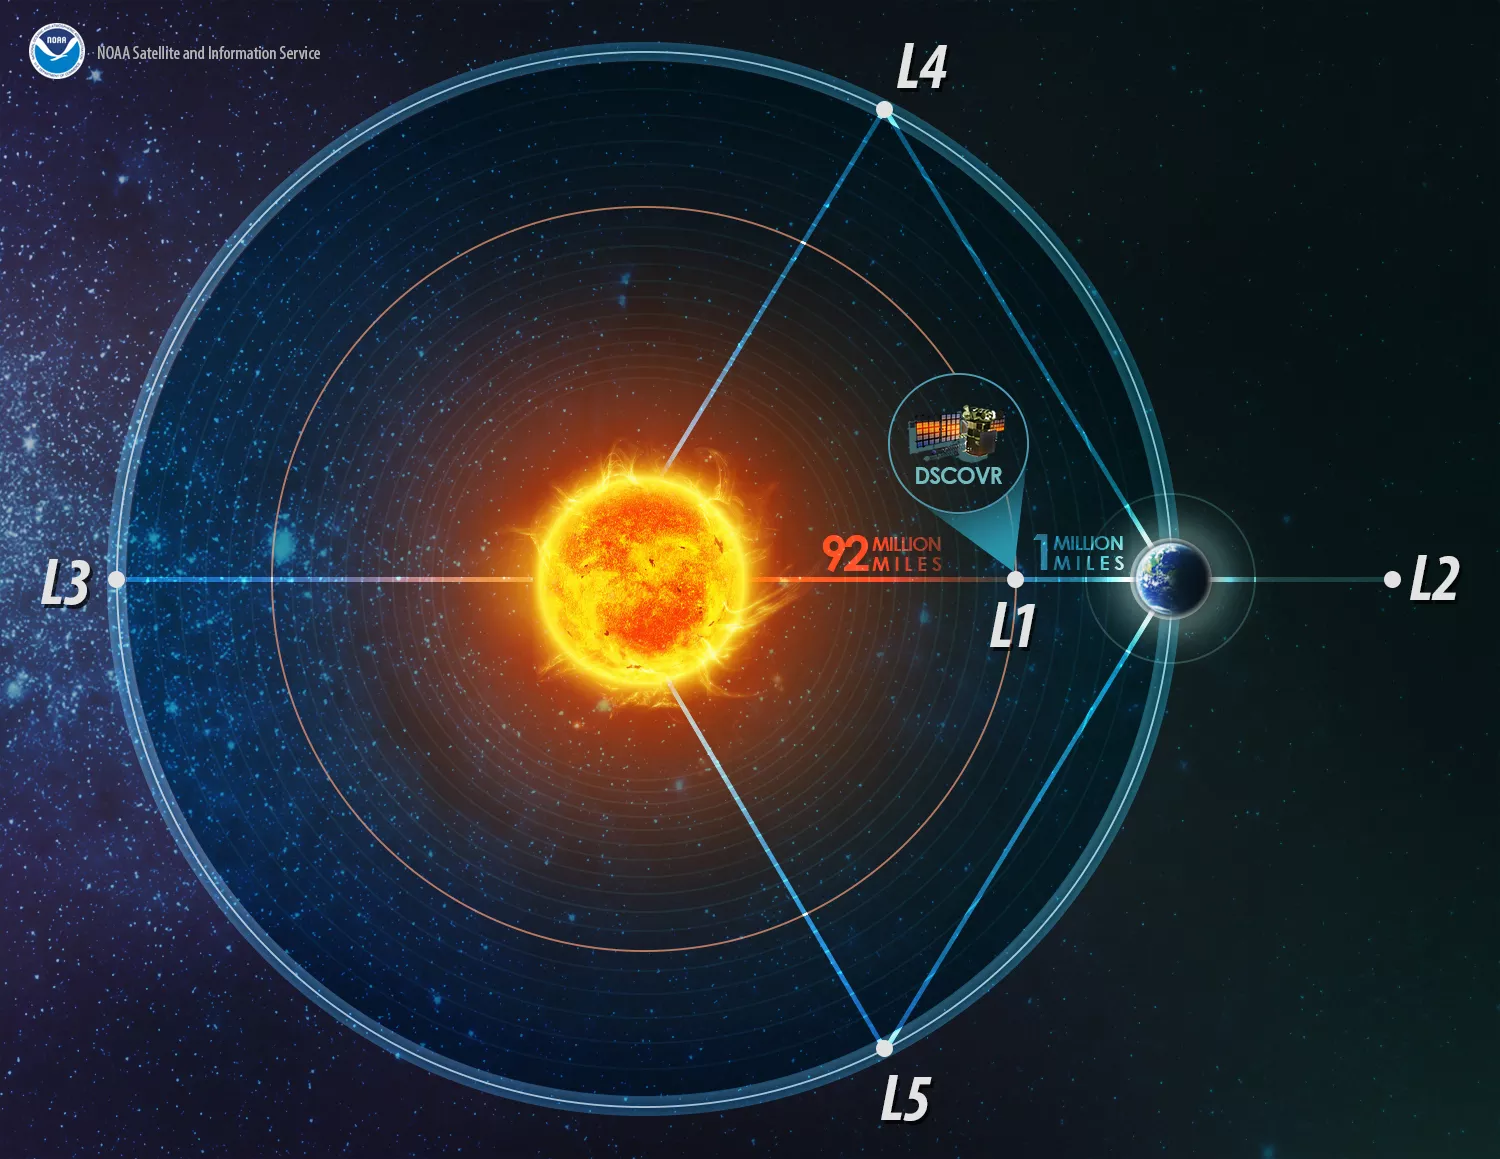 Image of Lagrange Points of the Earth-Sun system 